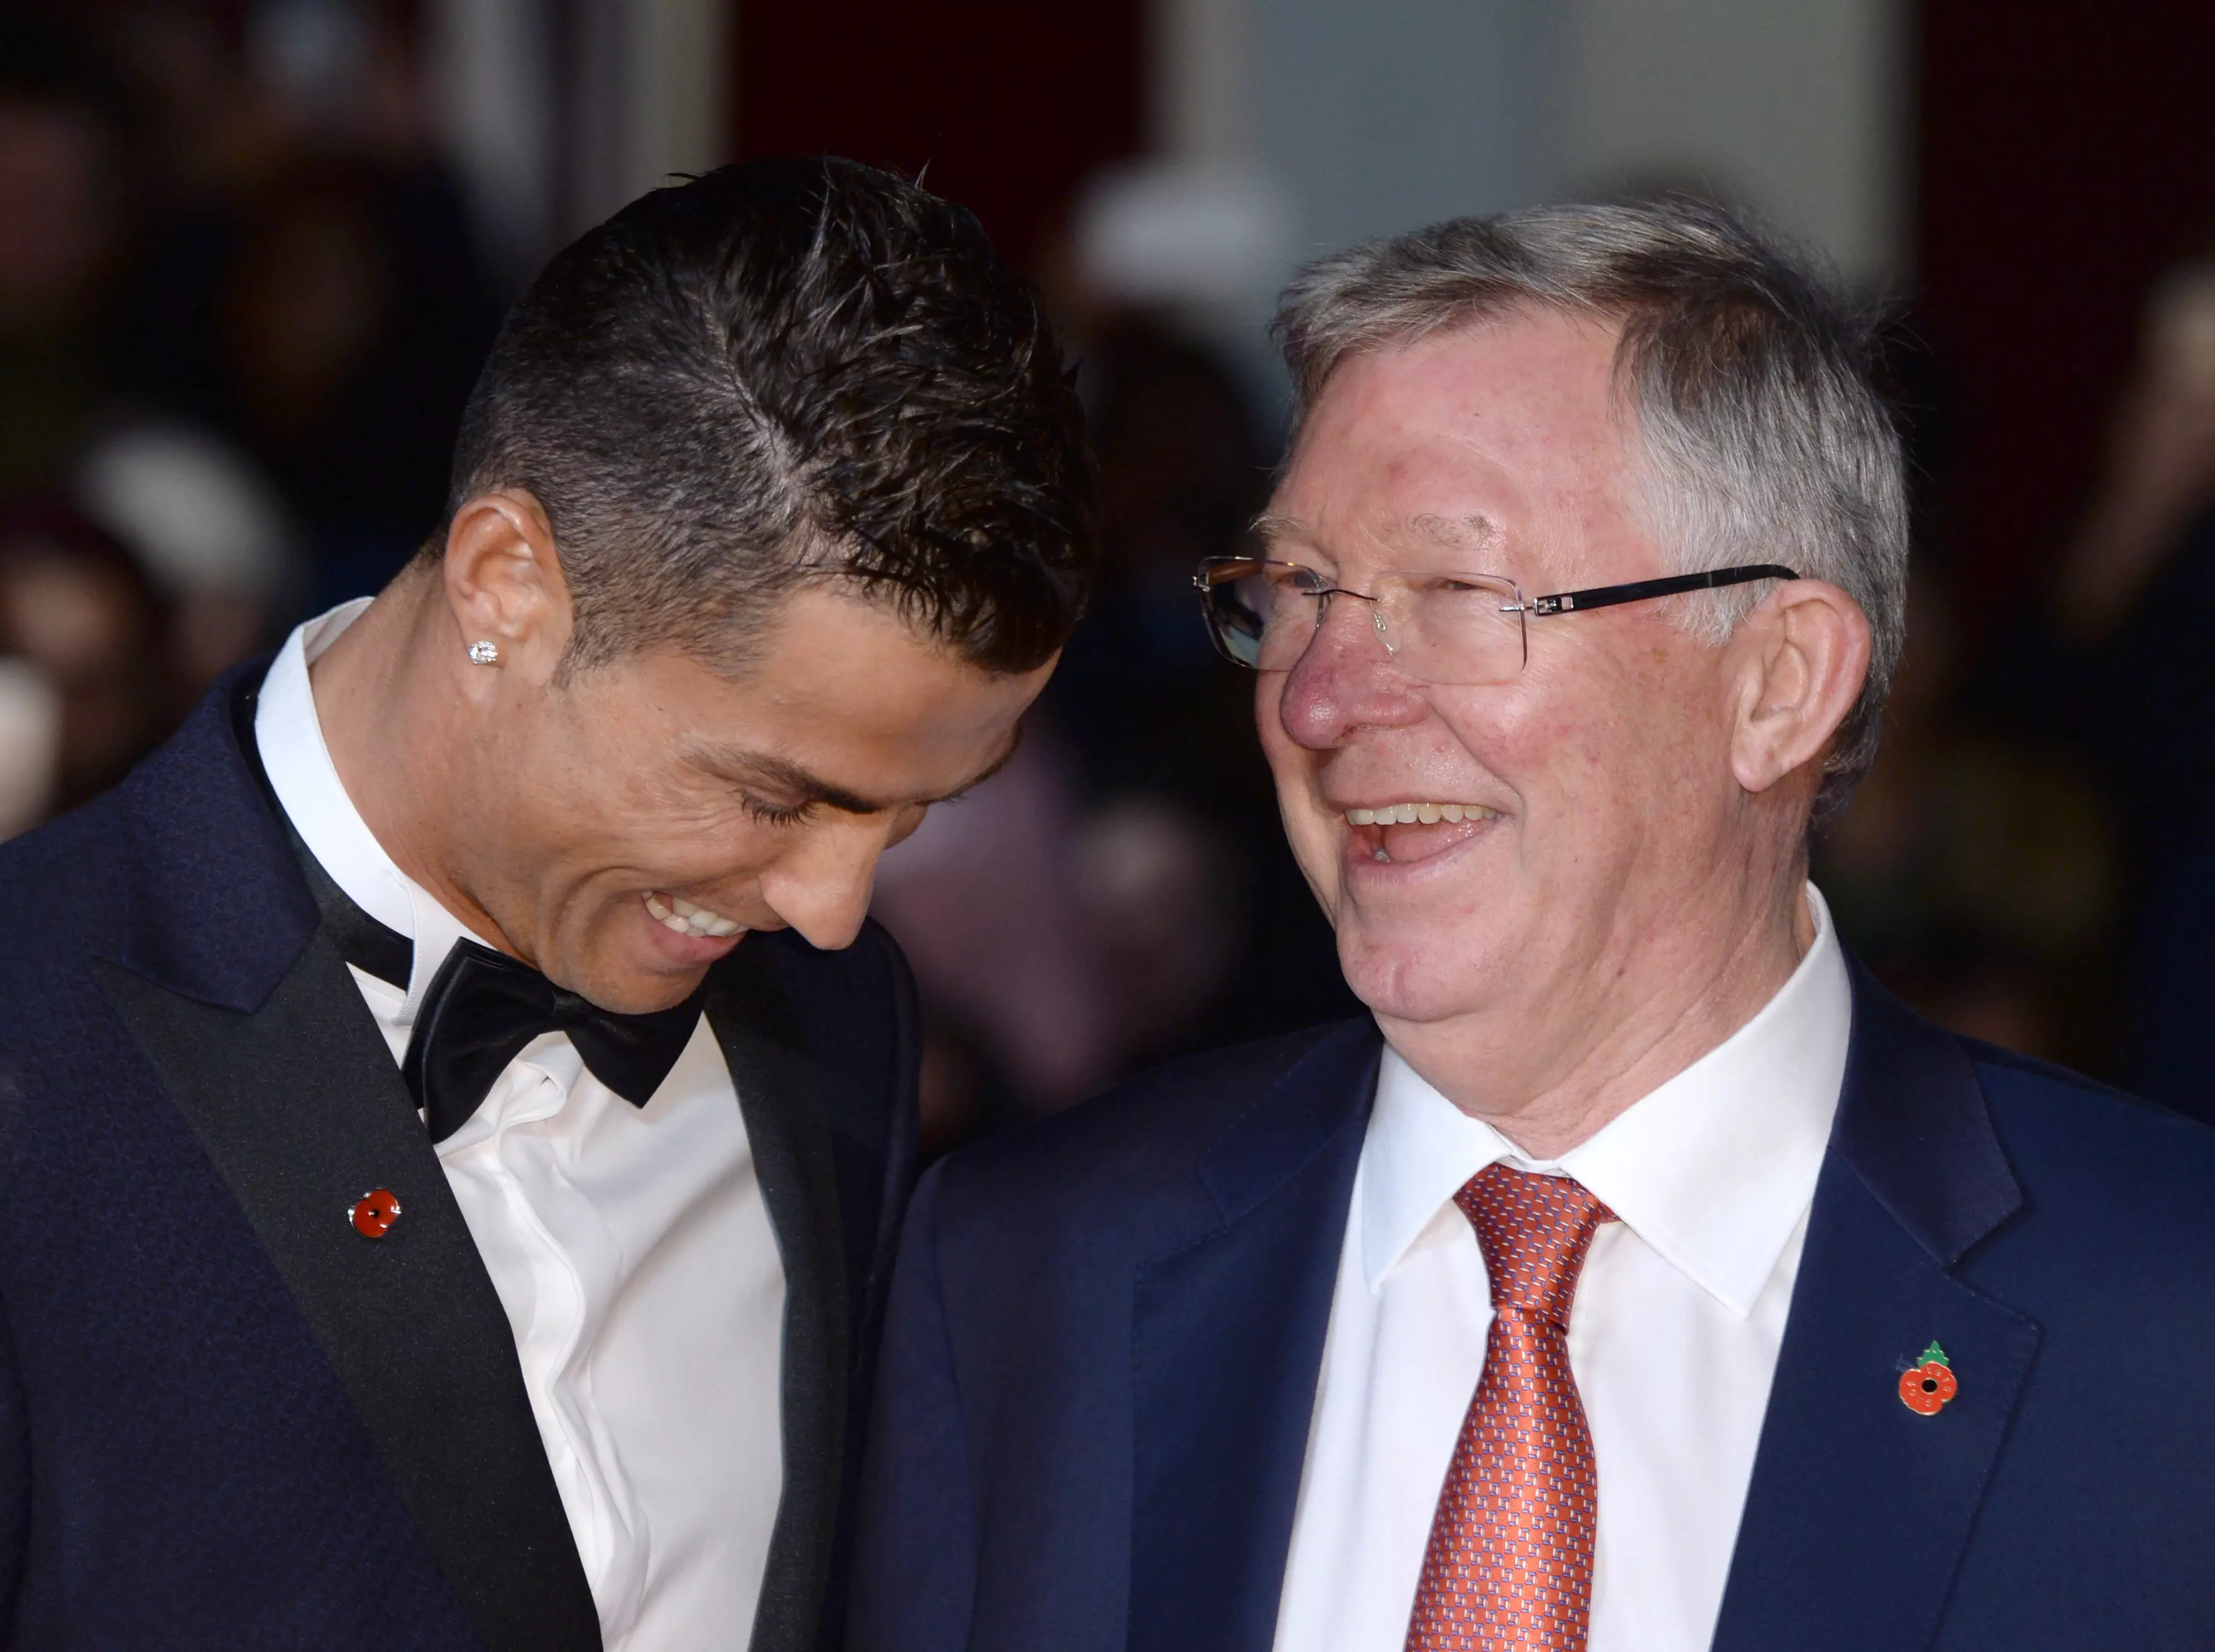 Ronaldo and Fergie laugh about Ronaldo's need to defend. Image: PA Images